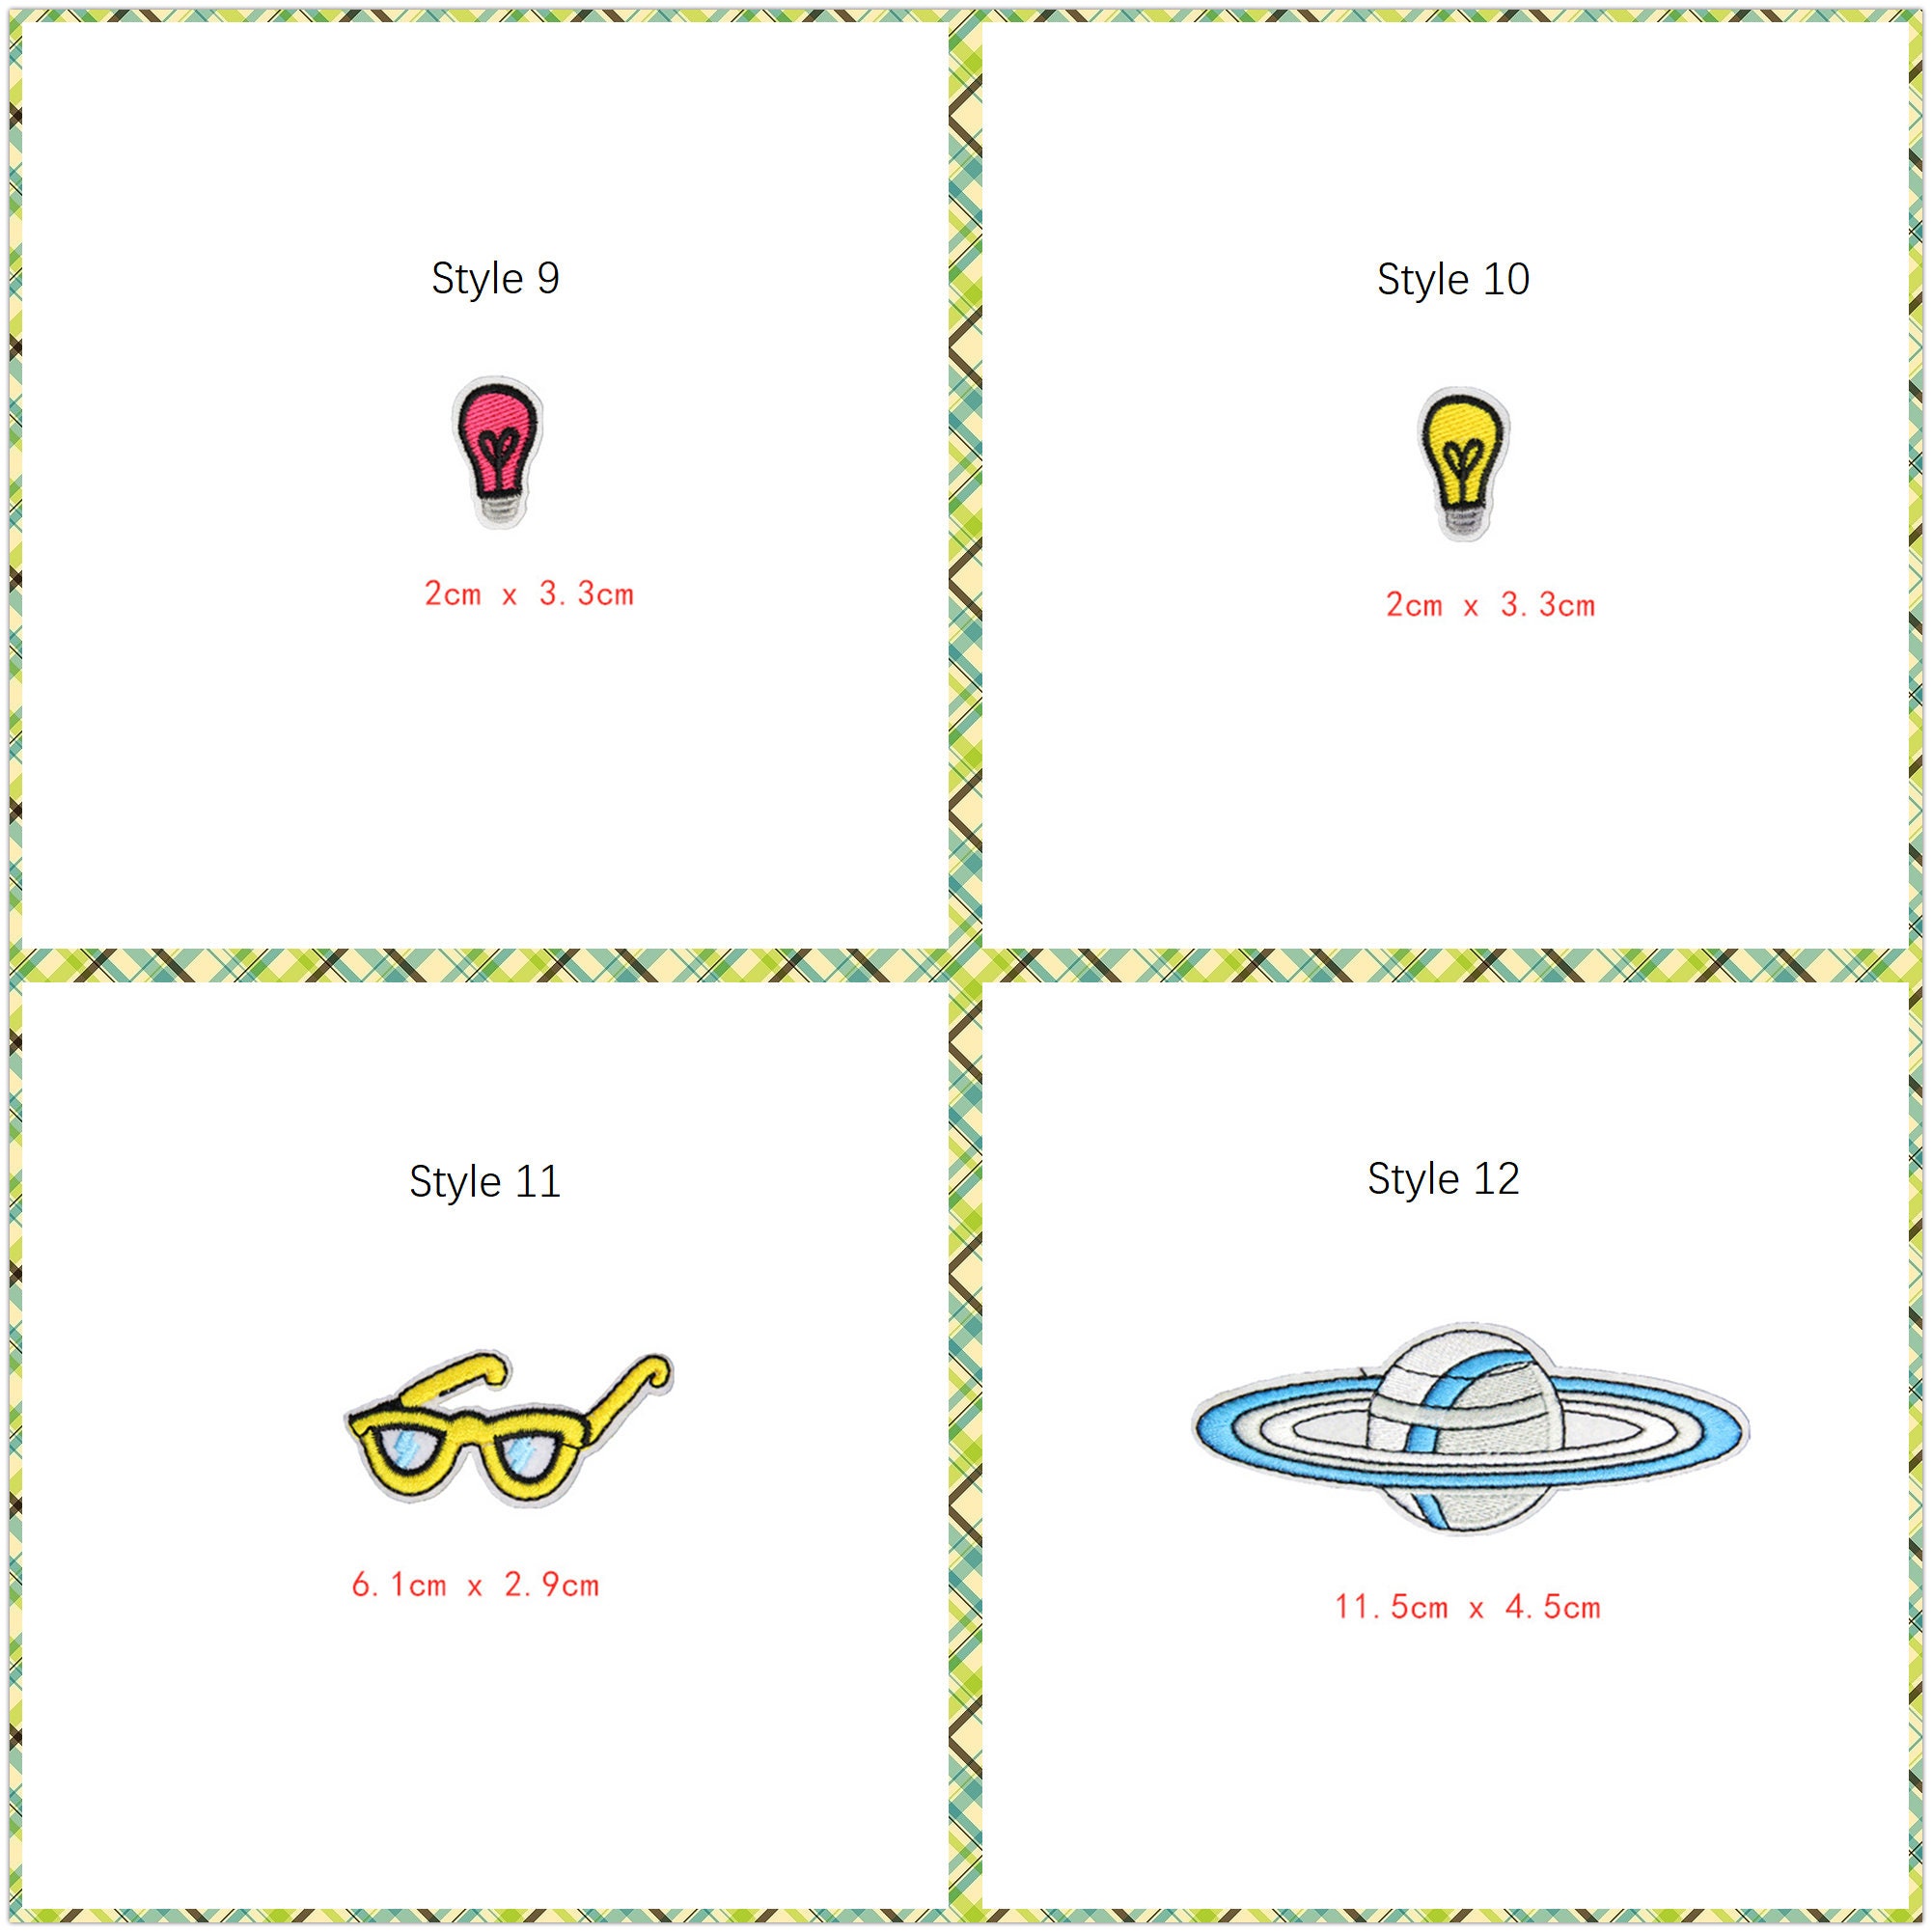  Wholesale Iron on Fabric Patch for Clothing/Bulk Embroidered  Sew on Applique Cute Patch Fabric Badge Garment DIY Apparel Accessories -  Tree Rocket hot air Balloon (WFB-18) (One of Each)